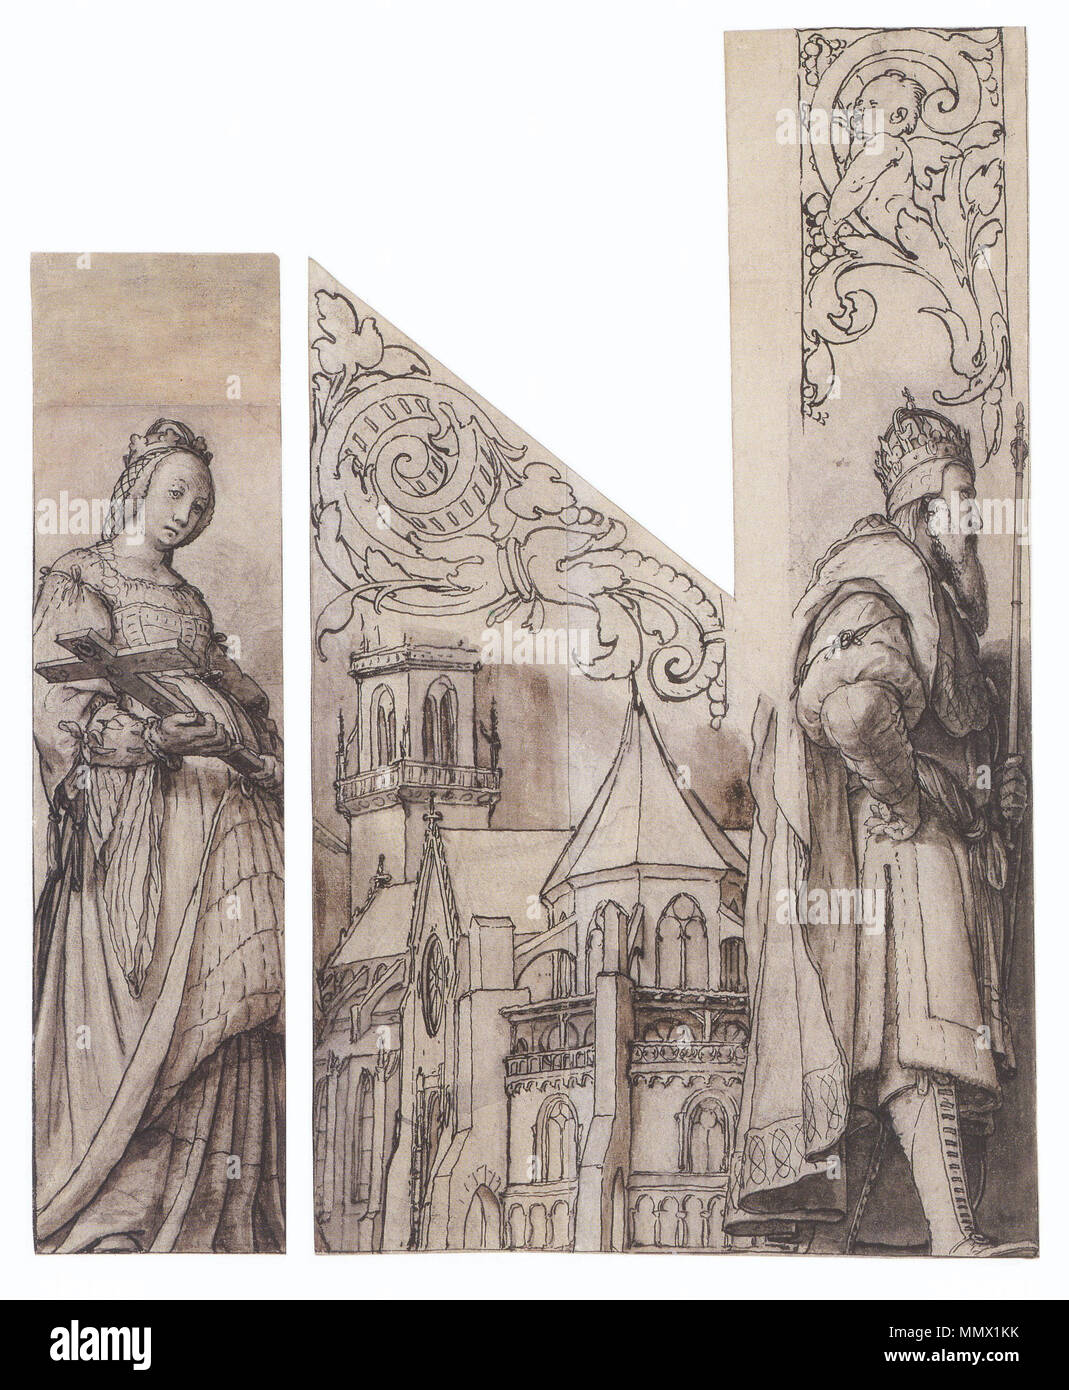 . English: Design for Organ Shutters for Basel Cathedral, parts 1 & 2, left side. Pen and ink and brush over preliminary chalk drawing, brown and grey wash, Kunstmuseum Basel.   Right shutters  1. The Empress Kunigunde, 26.1 × 7.6 cm (top), 7.8 cm (bottom) 2. The Emperor Heinrich II and Basel Cathedral, 30.6 (left), 37.9 (right) × 22.2 cm} Organ shutters protected the organ from dust and dirt. Here, the central panels and side panels would have been connected by a hinge. These left-side shutters depict the founders of Basel Cathedral, Heinrich II, Holy Roman Emperor, and his wife St Kunigunde  Stock Photo